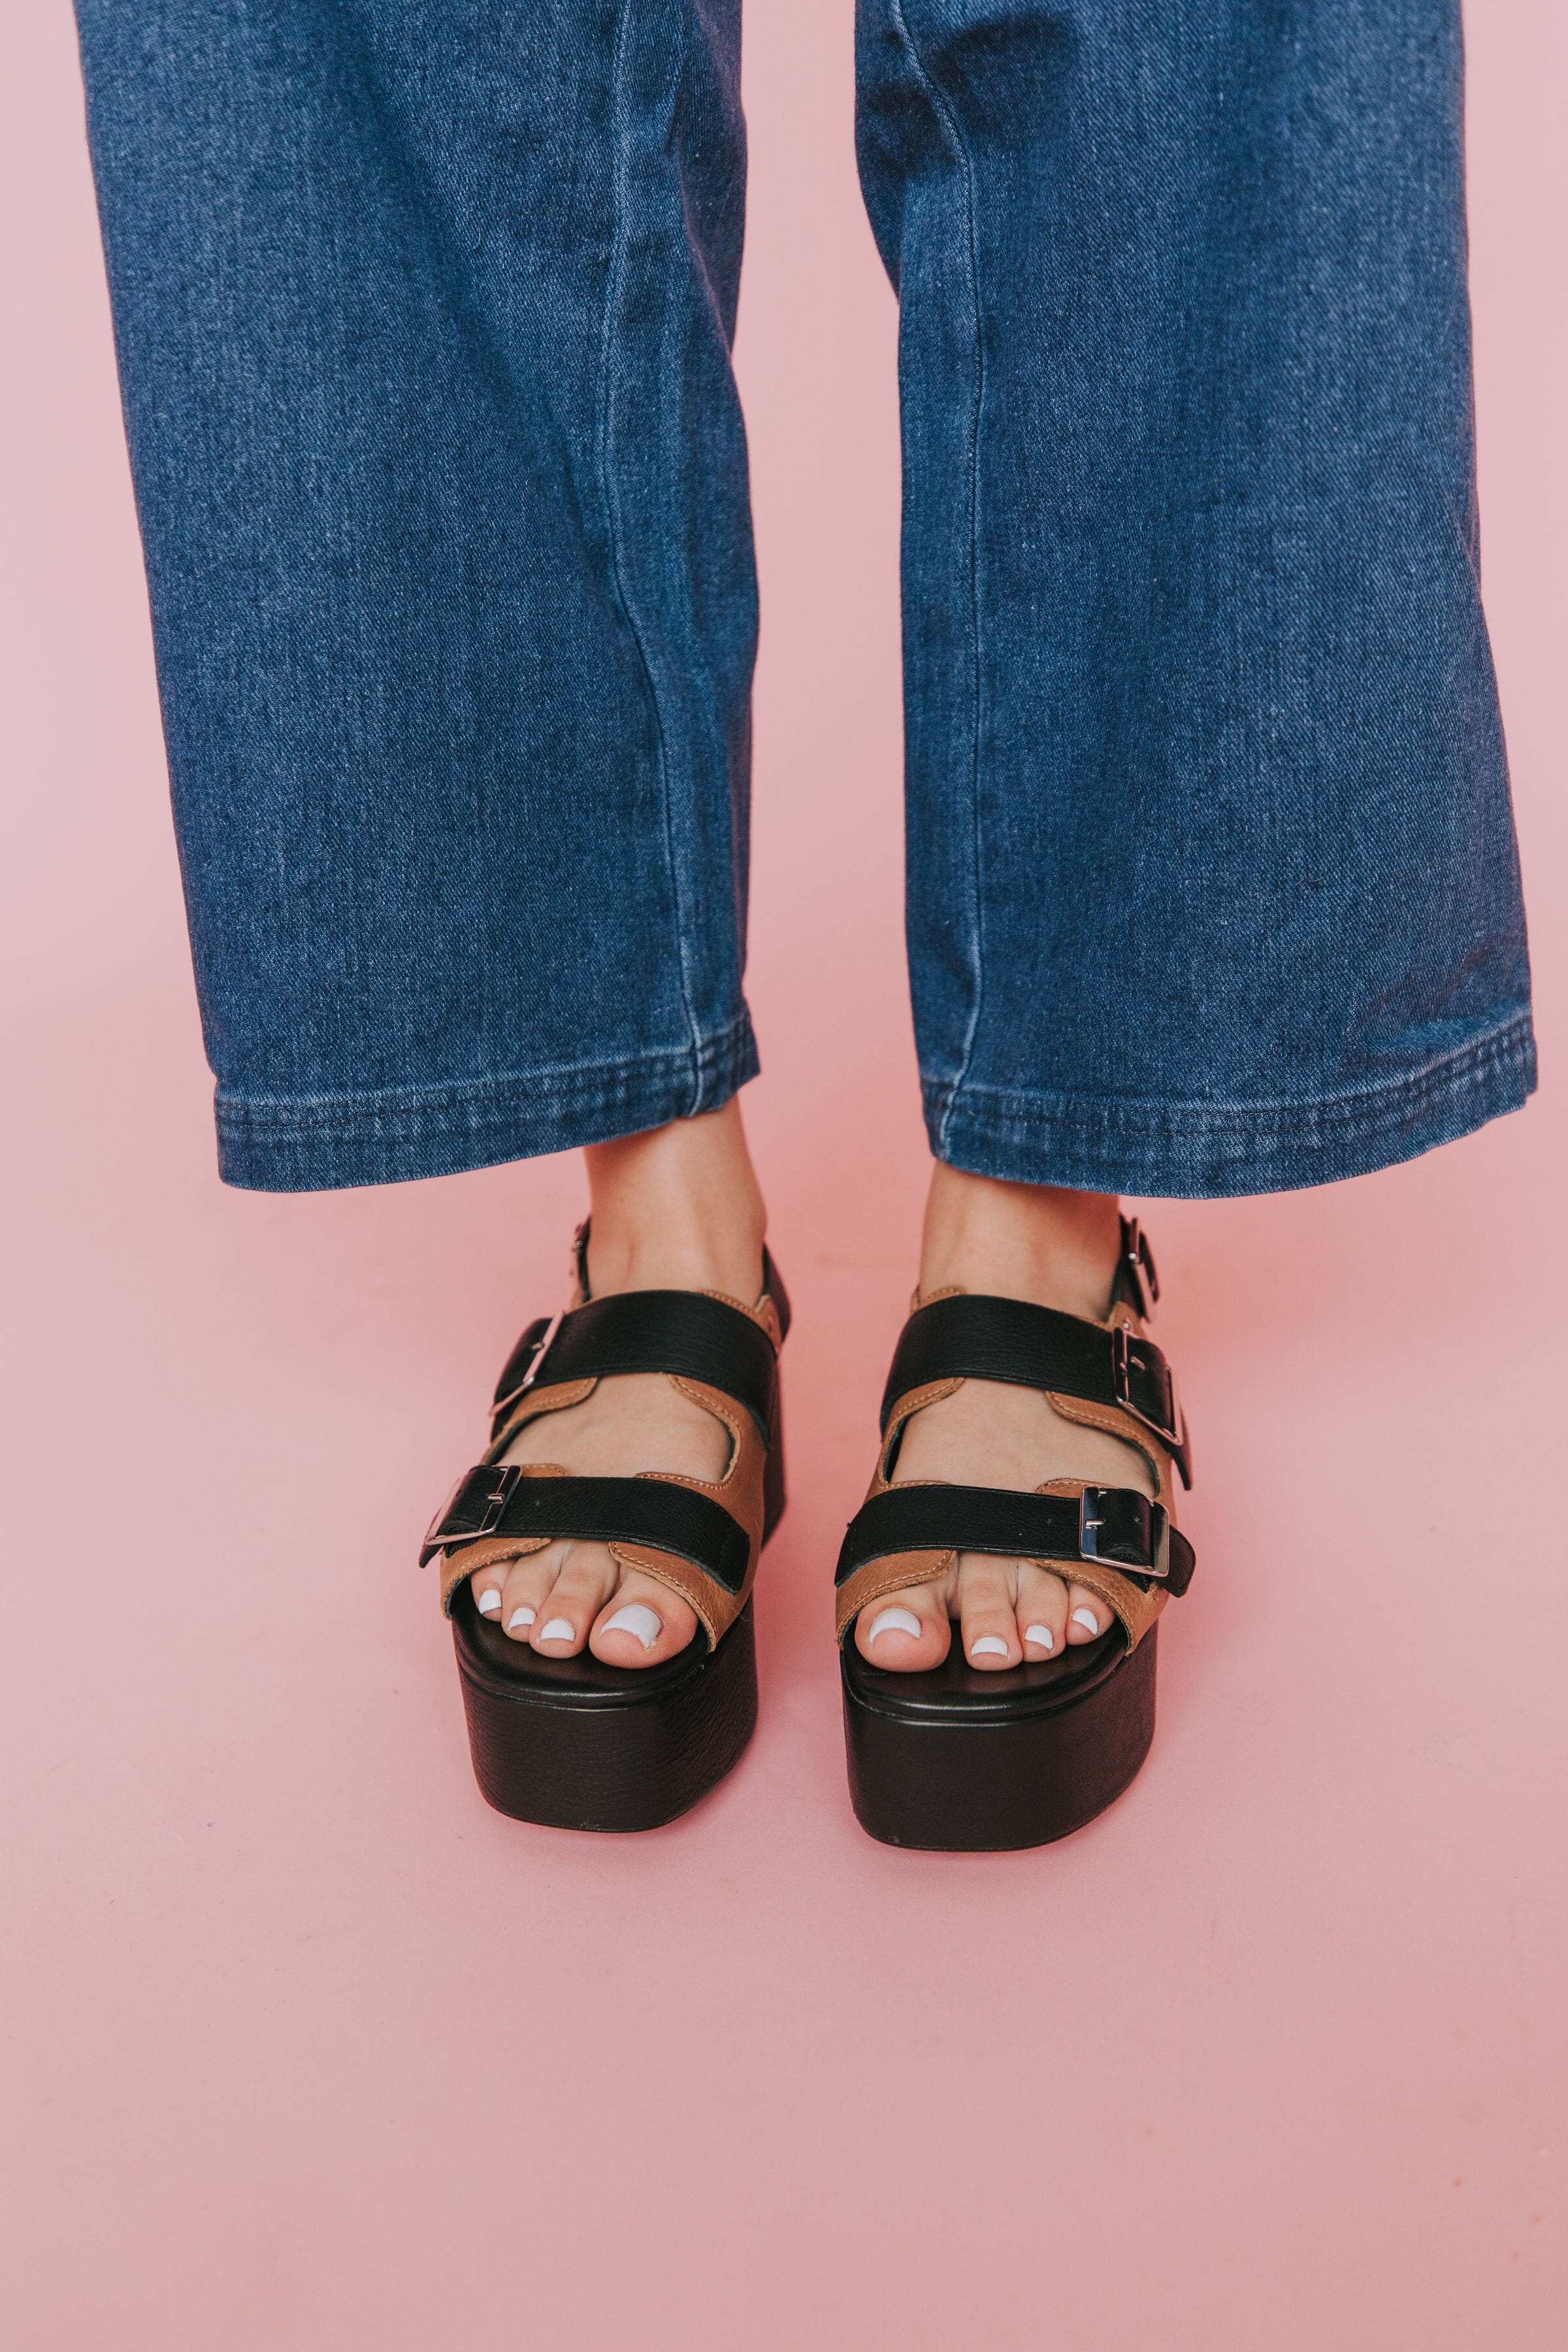 FREE PEOPLE - Follow Your Own Path Platform Sandals 